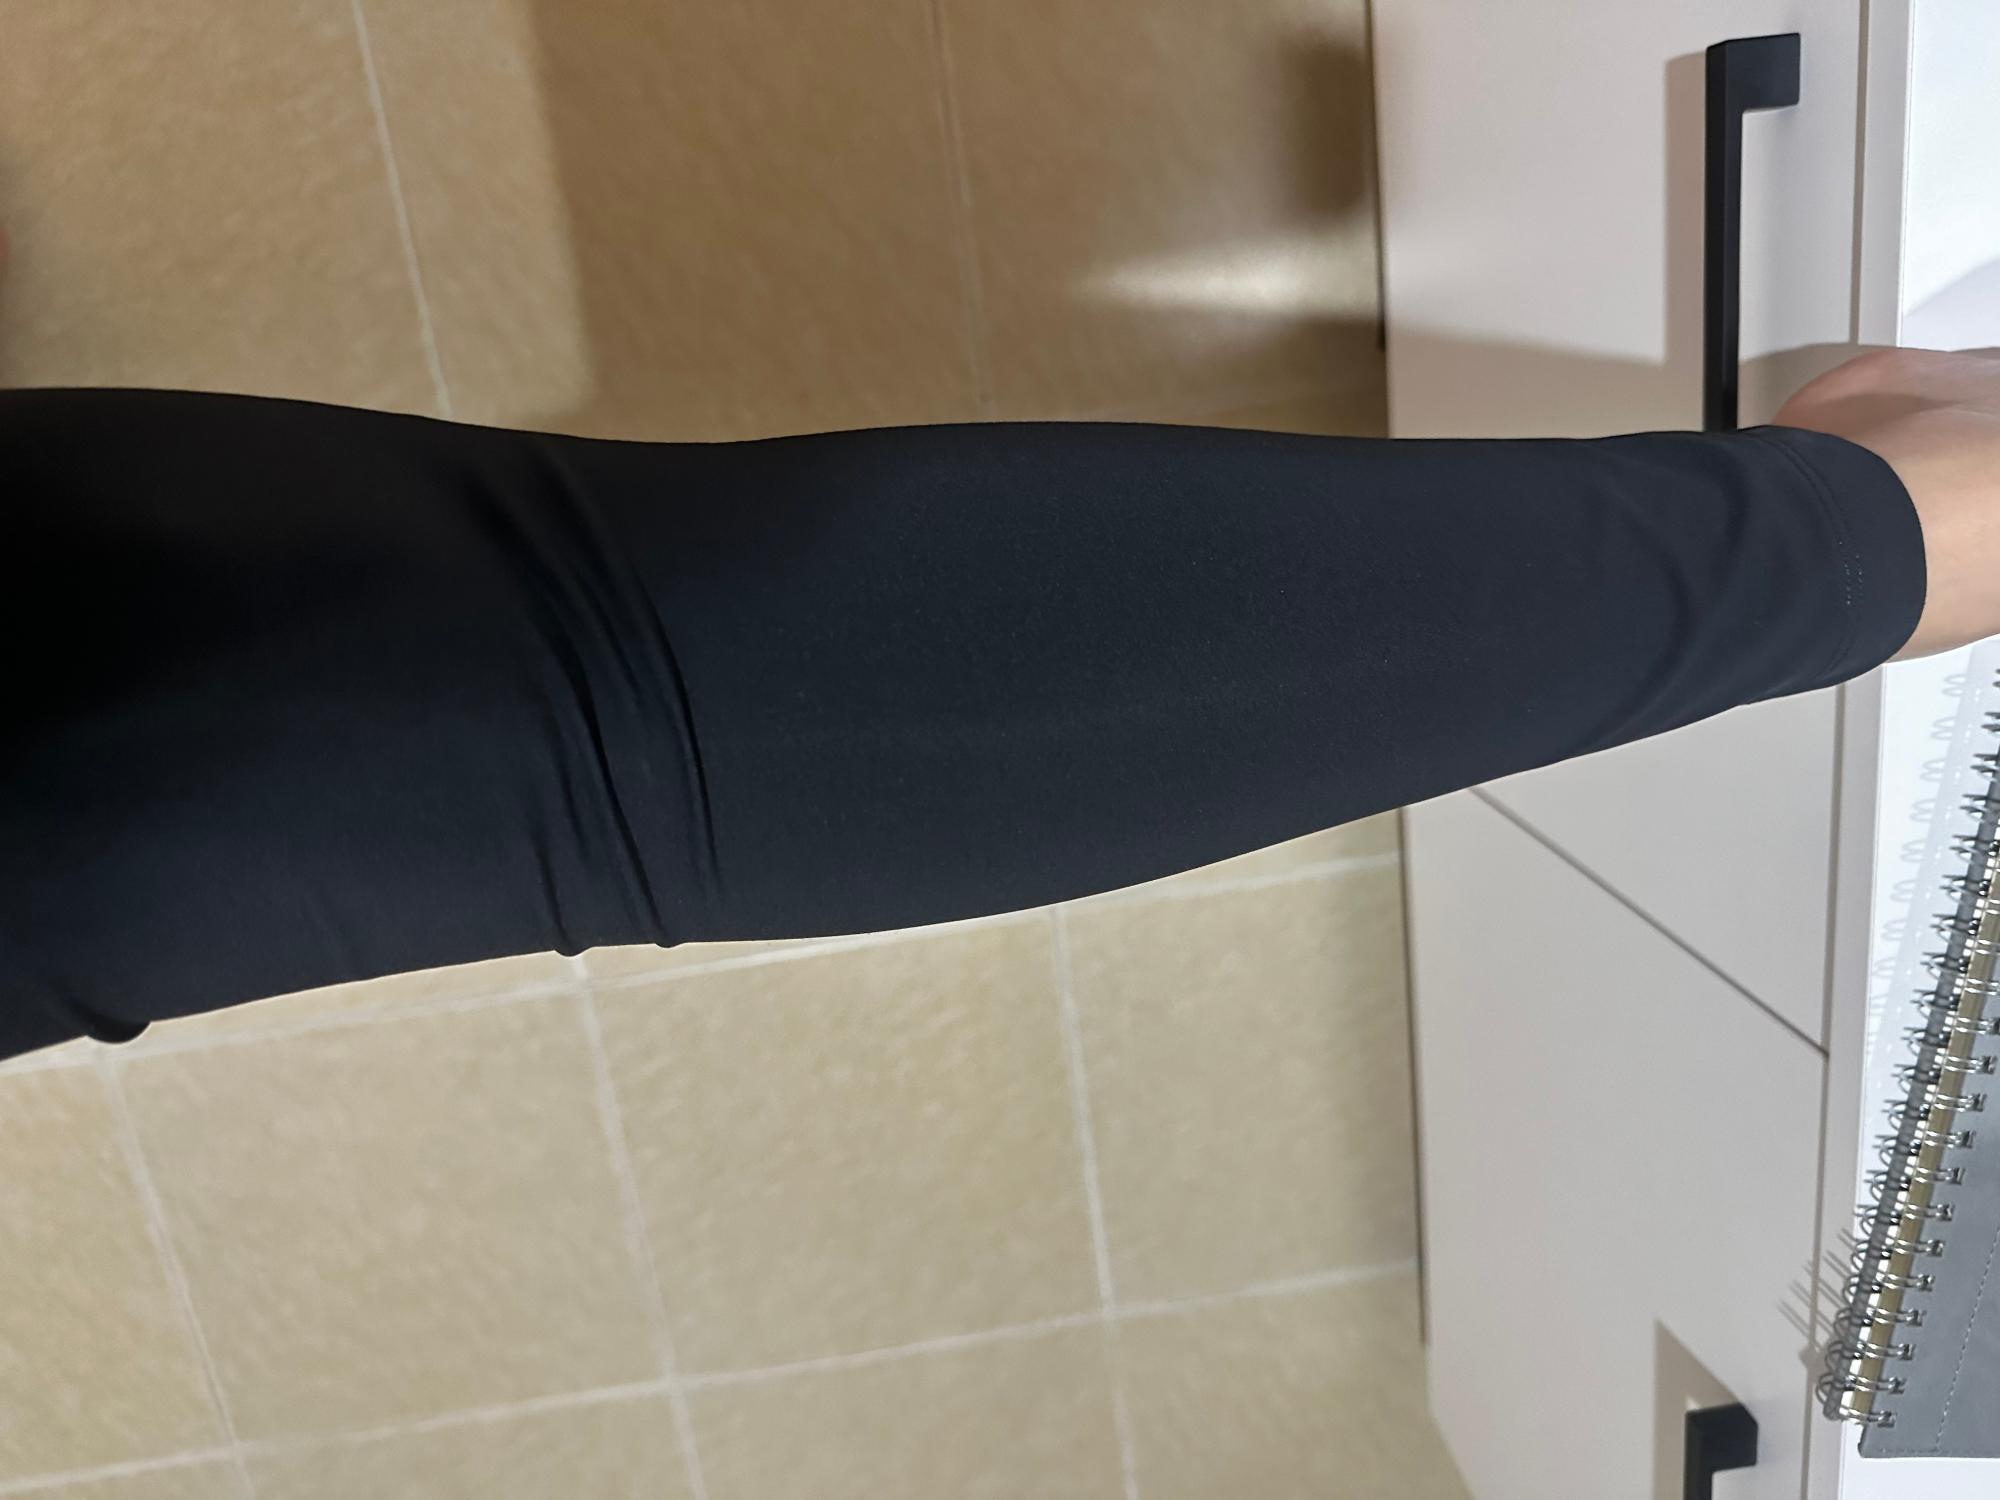 Calzedonia Tights Lost Shape, Became Loose in a Month - Xolvie